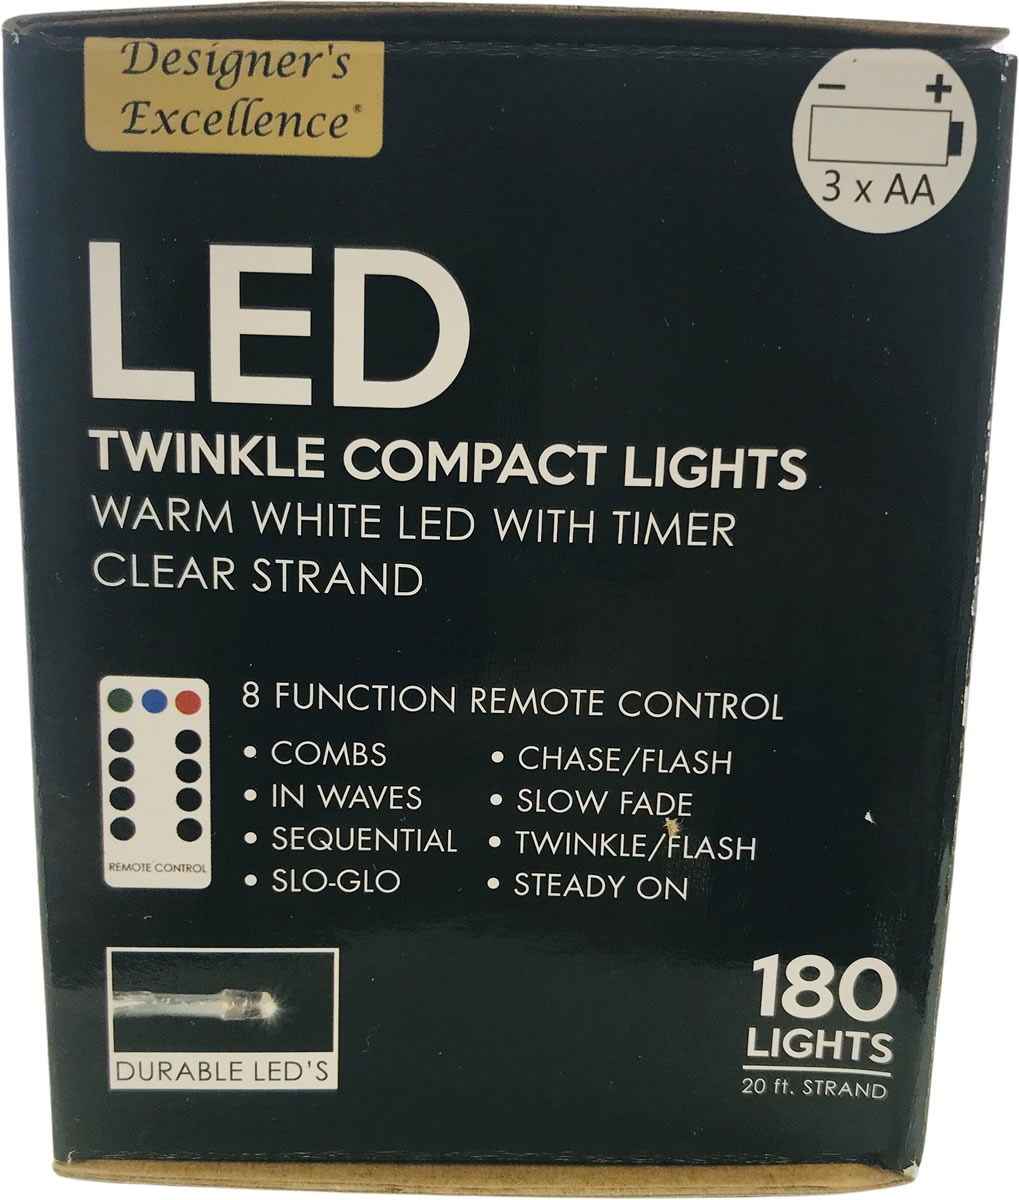 Direct Export Company LED Twinkle Compact Lights 20Ft Warm White w Clear Strand Battery Operated 8 Function Remote Control